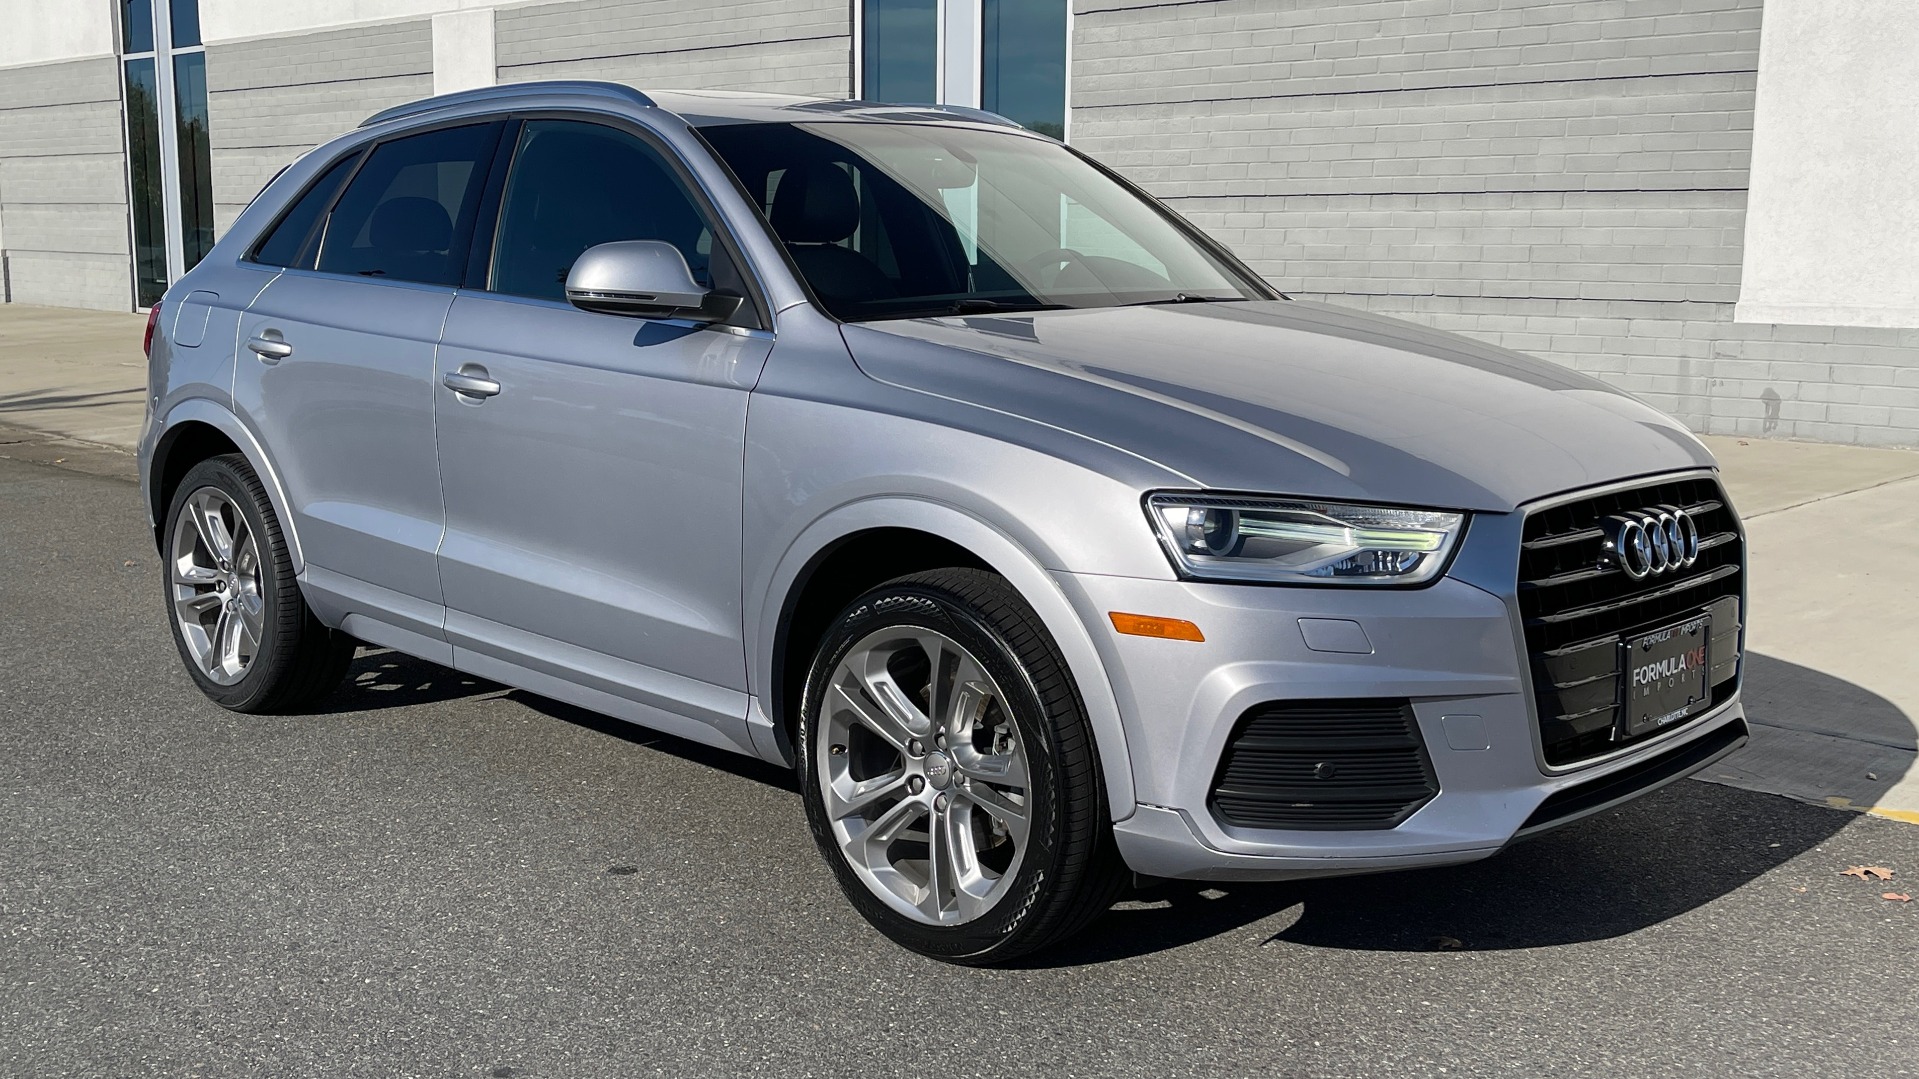 Used 2016 Audi Q3 PREMIUM PLUS 2.0L / PANO-ROOF / HTD STS / 19IN WHEELS / REARVIEW for sale Sold at Formula Imports in Charlotte NC 28227 5